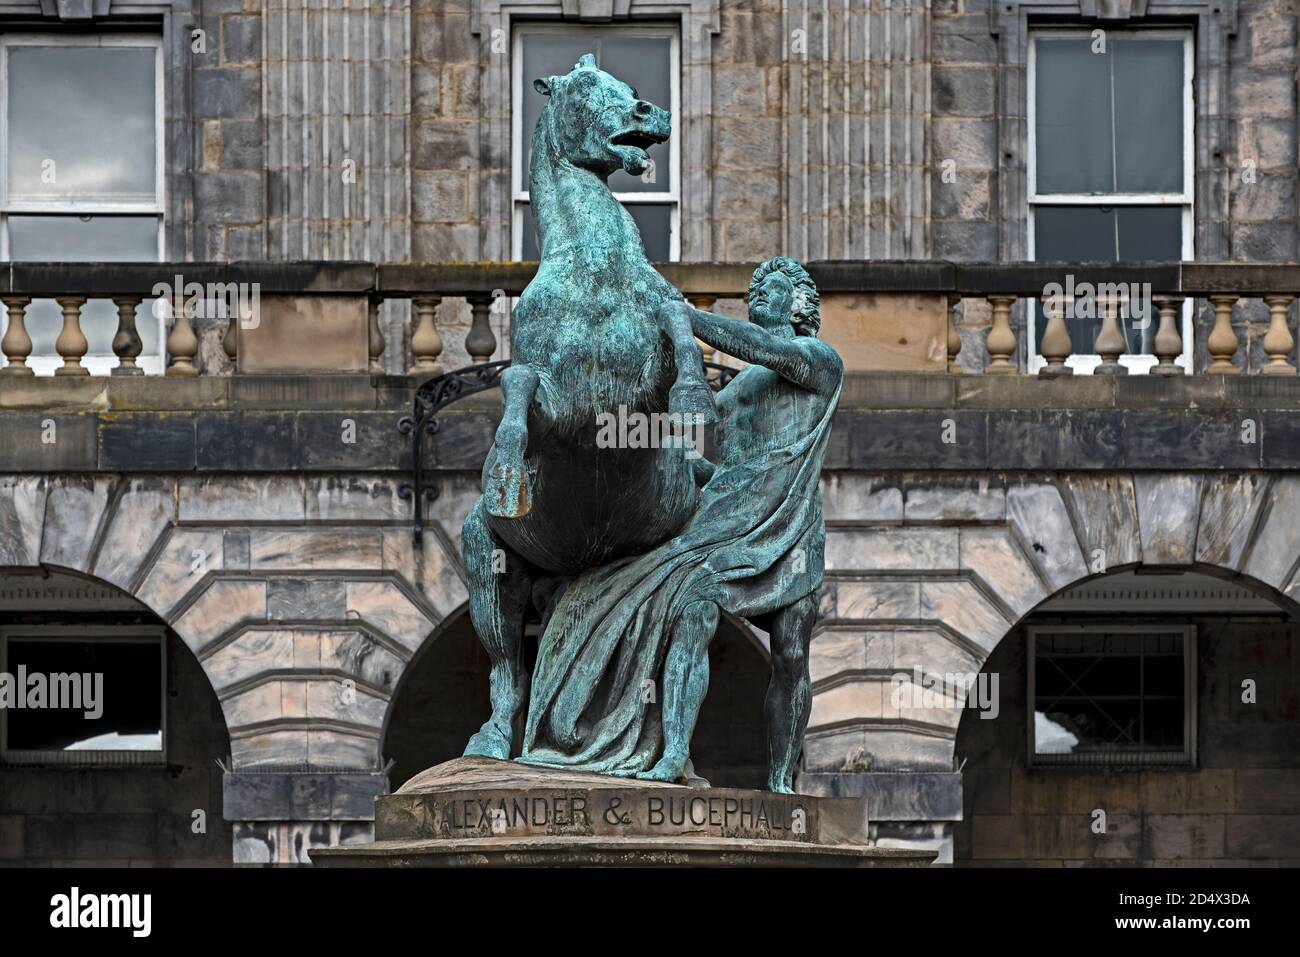 The bronze statue of Alexander the Great and his horse Bucephalus in the courtyard of Edinburgh City Chambers in Edinburgh's Old Town. Stock Photo